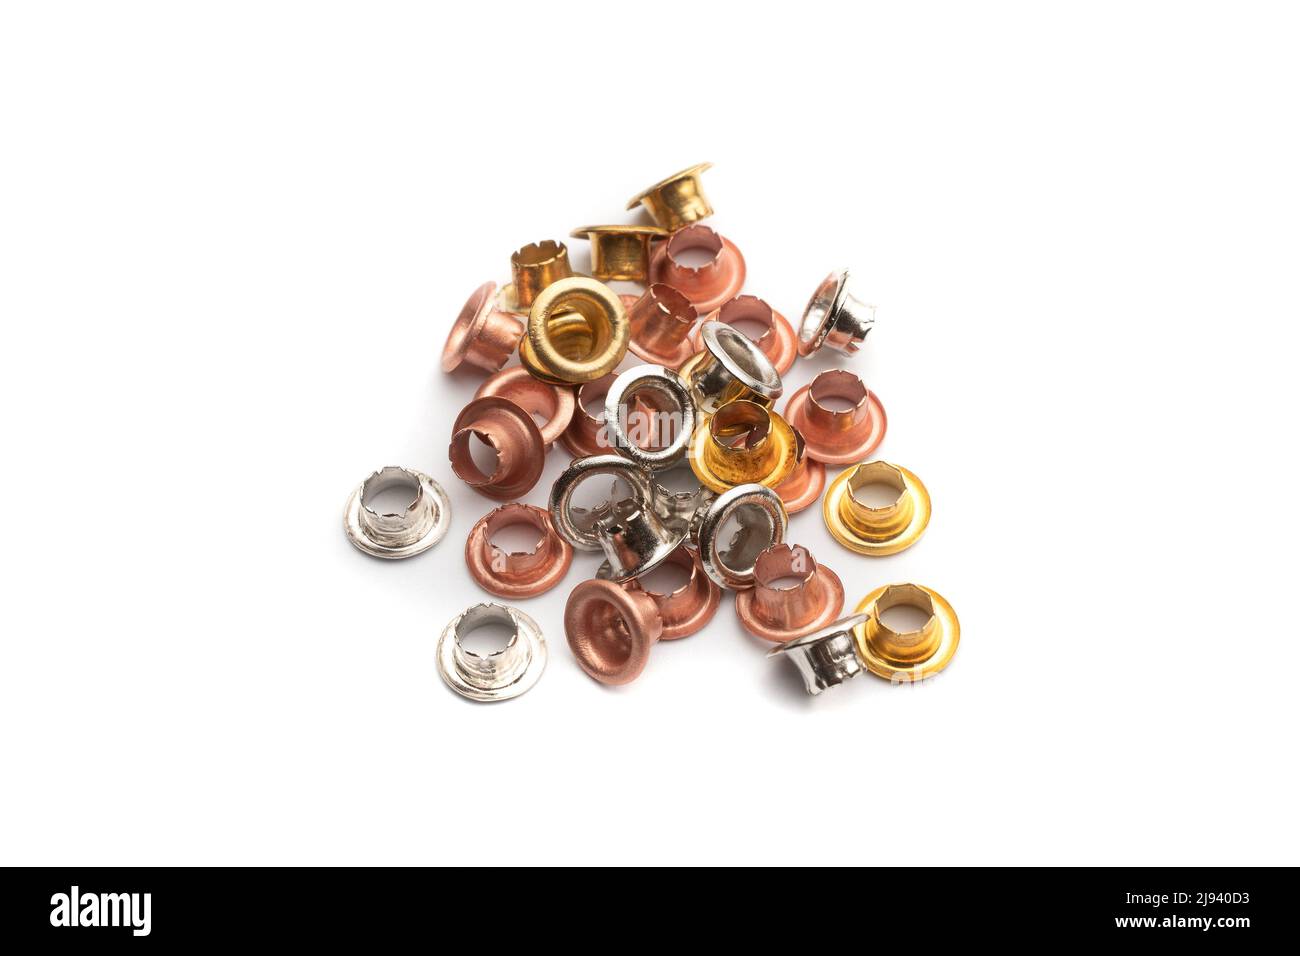 Eyelets in copper, gold and silver colored metal on a white background Stock Photo